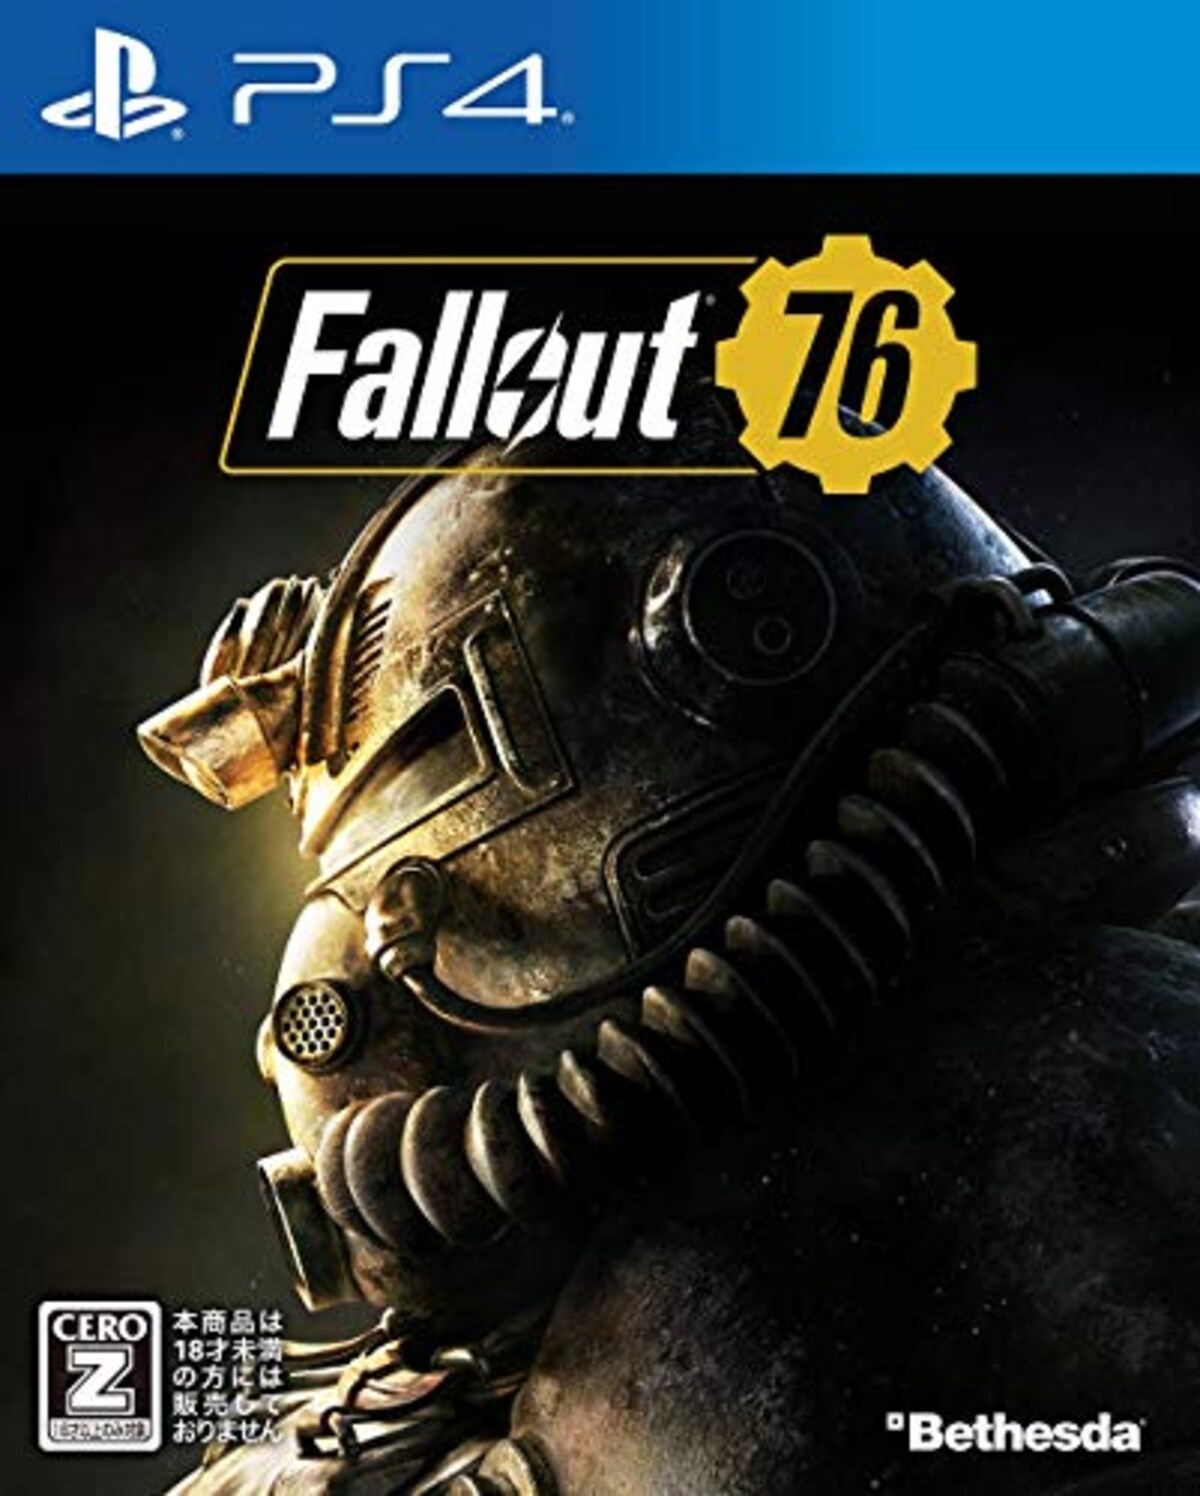 Fallout 76【Amazon.co.jp限定】オリジナルPS4用テーマ配信 【CEROレーティング「Z」】